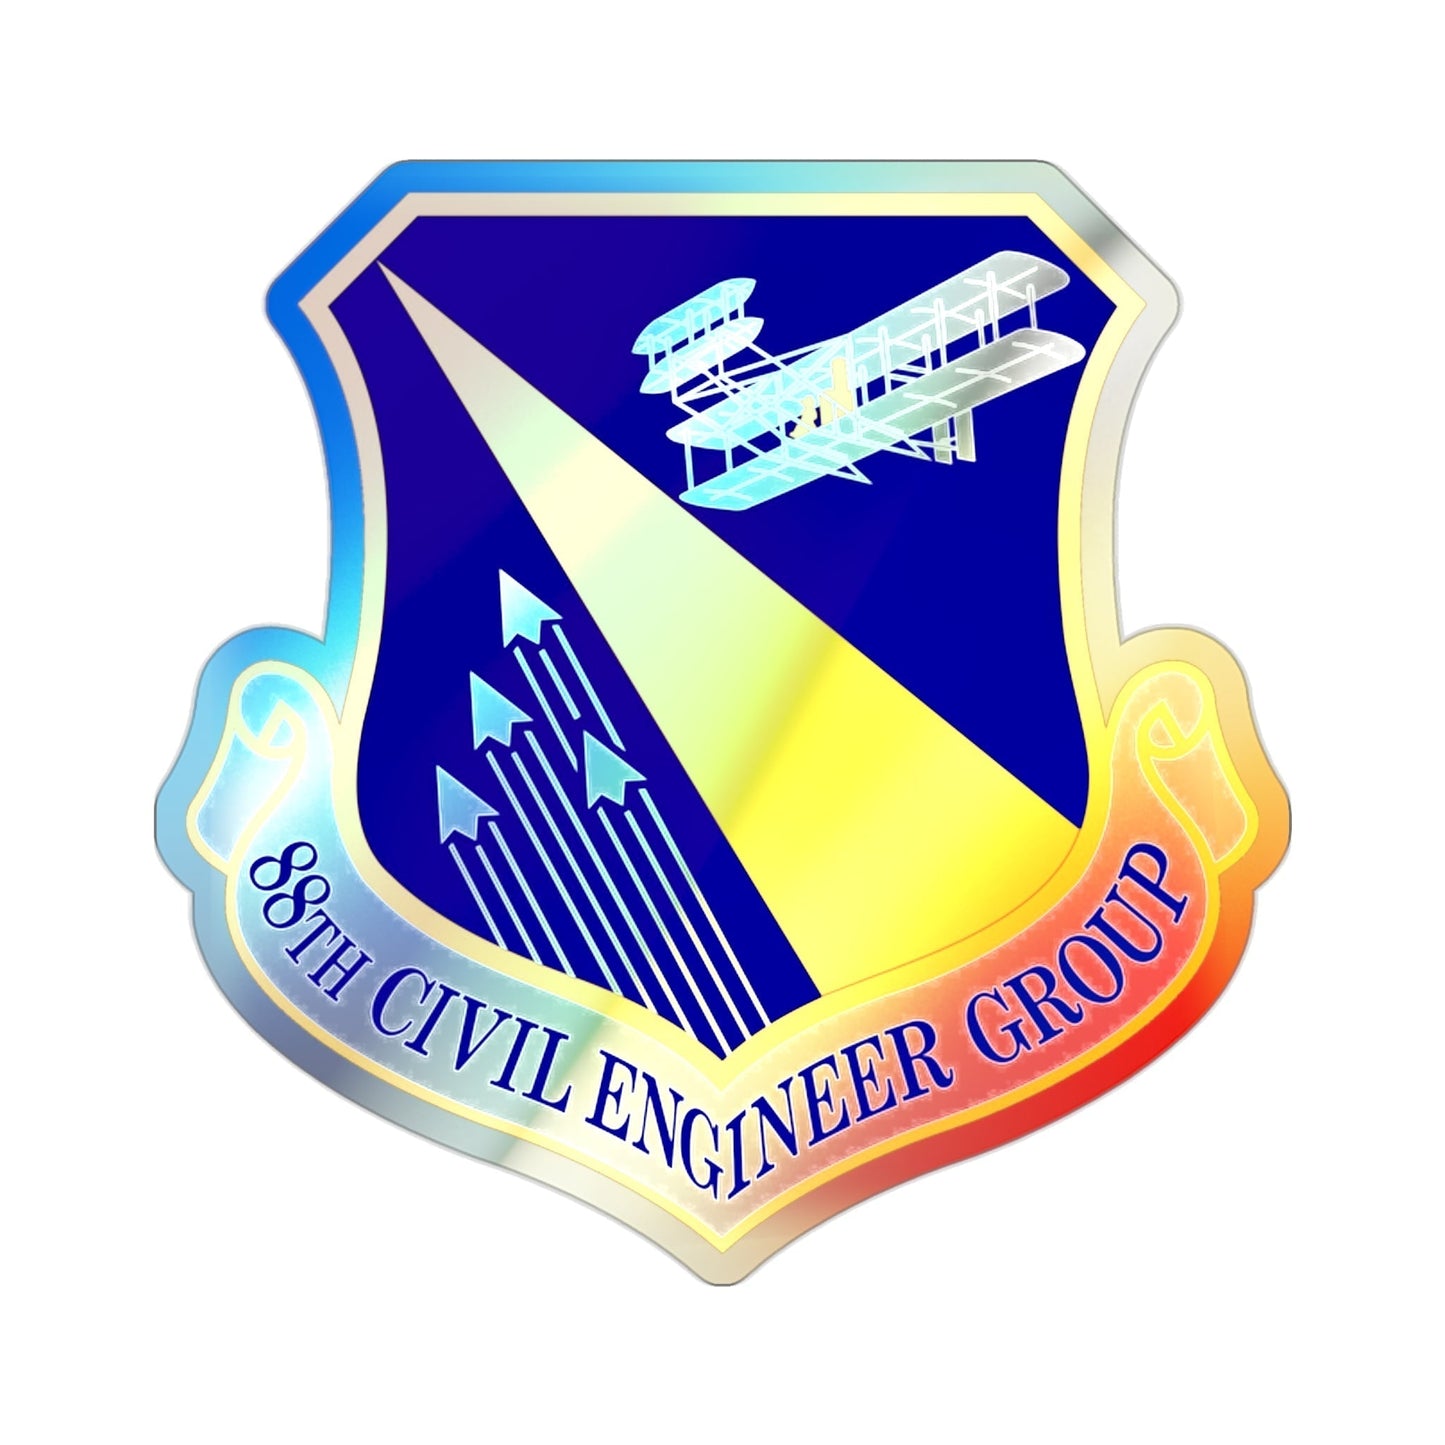 88 Civil Engineer Group AFMC (U.S. Air Force) Holographic STICKER Die-Cut Vinyl Decal-2 Inch-The Sticker Space